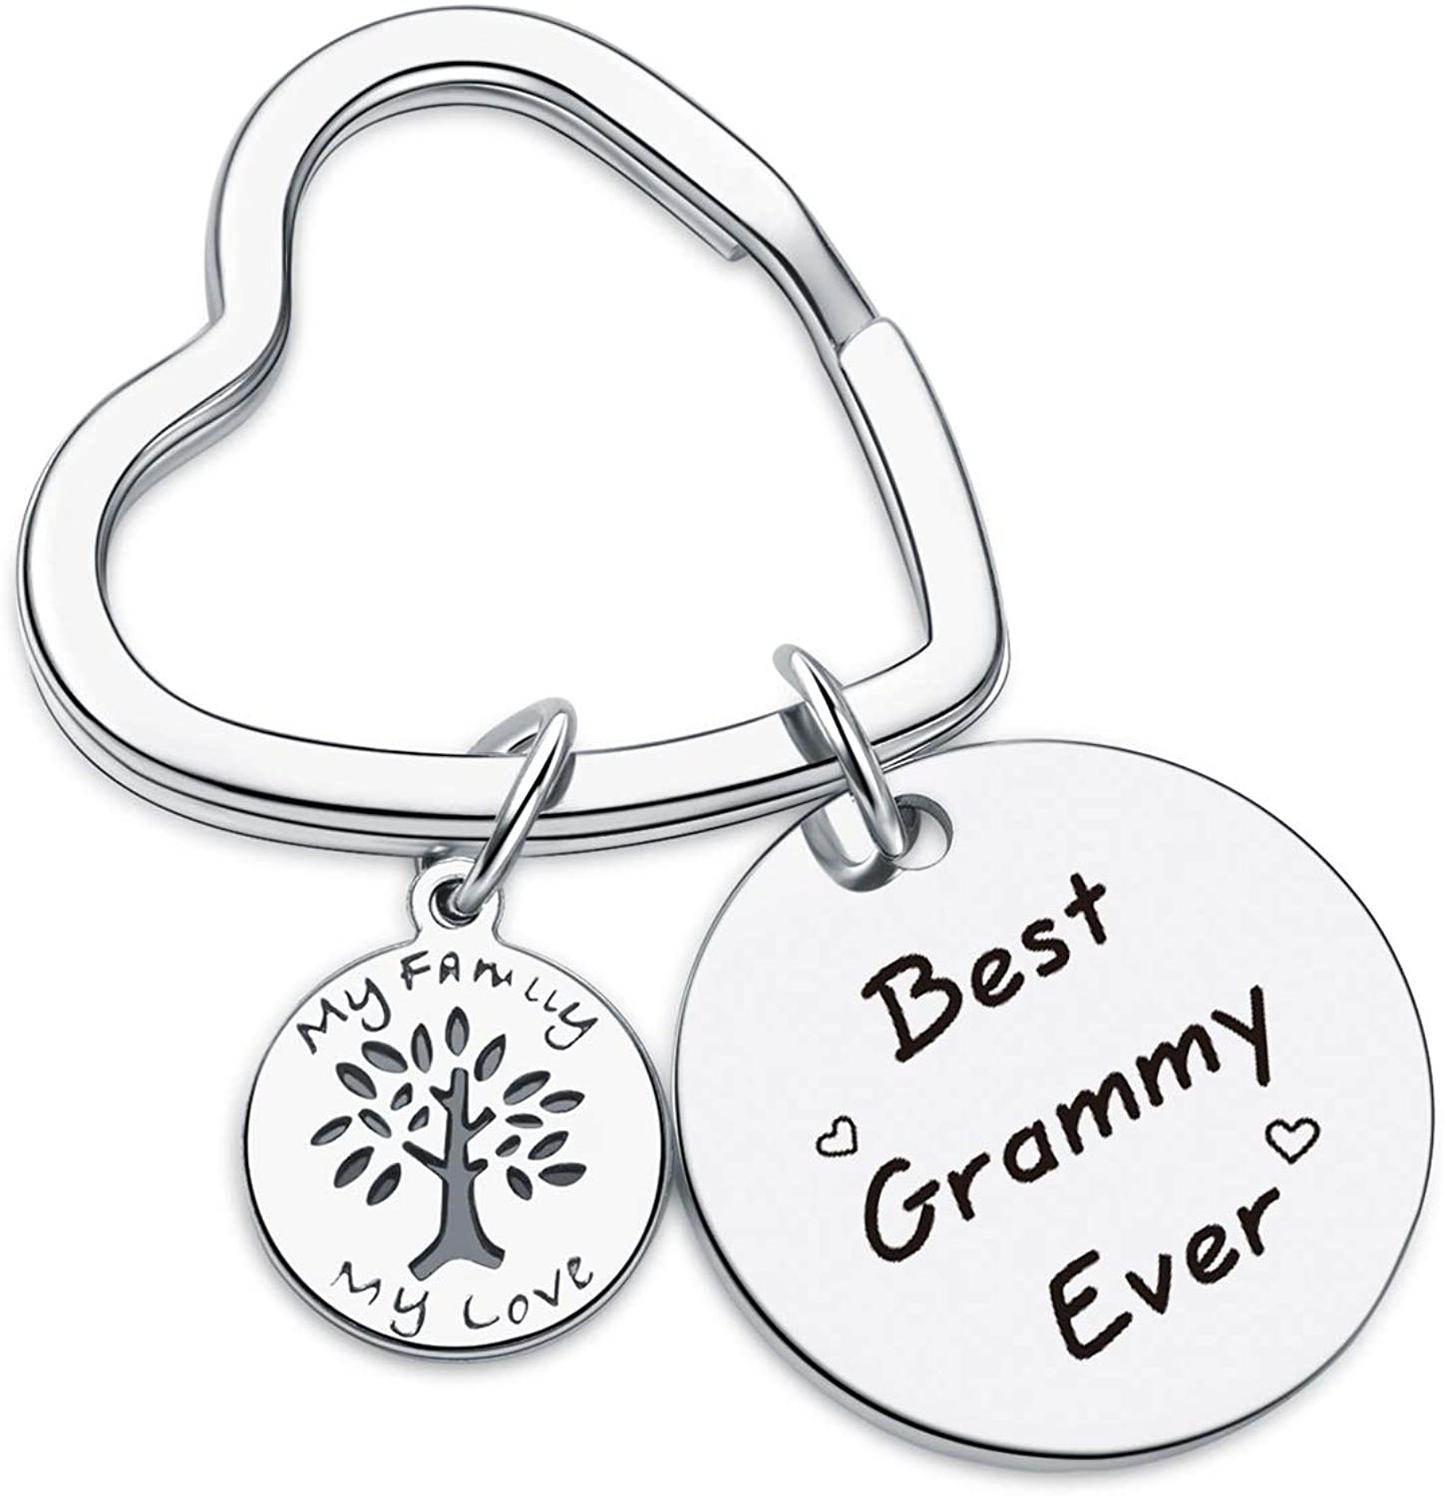 Grammy Jewelry Mother Jewelry for Mother Gift Nana Gift Nana Jewelry Mother Keychain Grandma Keychain Nana Appreciation Gift Mothers Day Jewelry Grandmother Gift Grammy Keychain